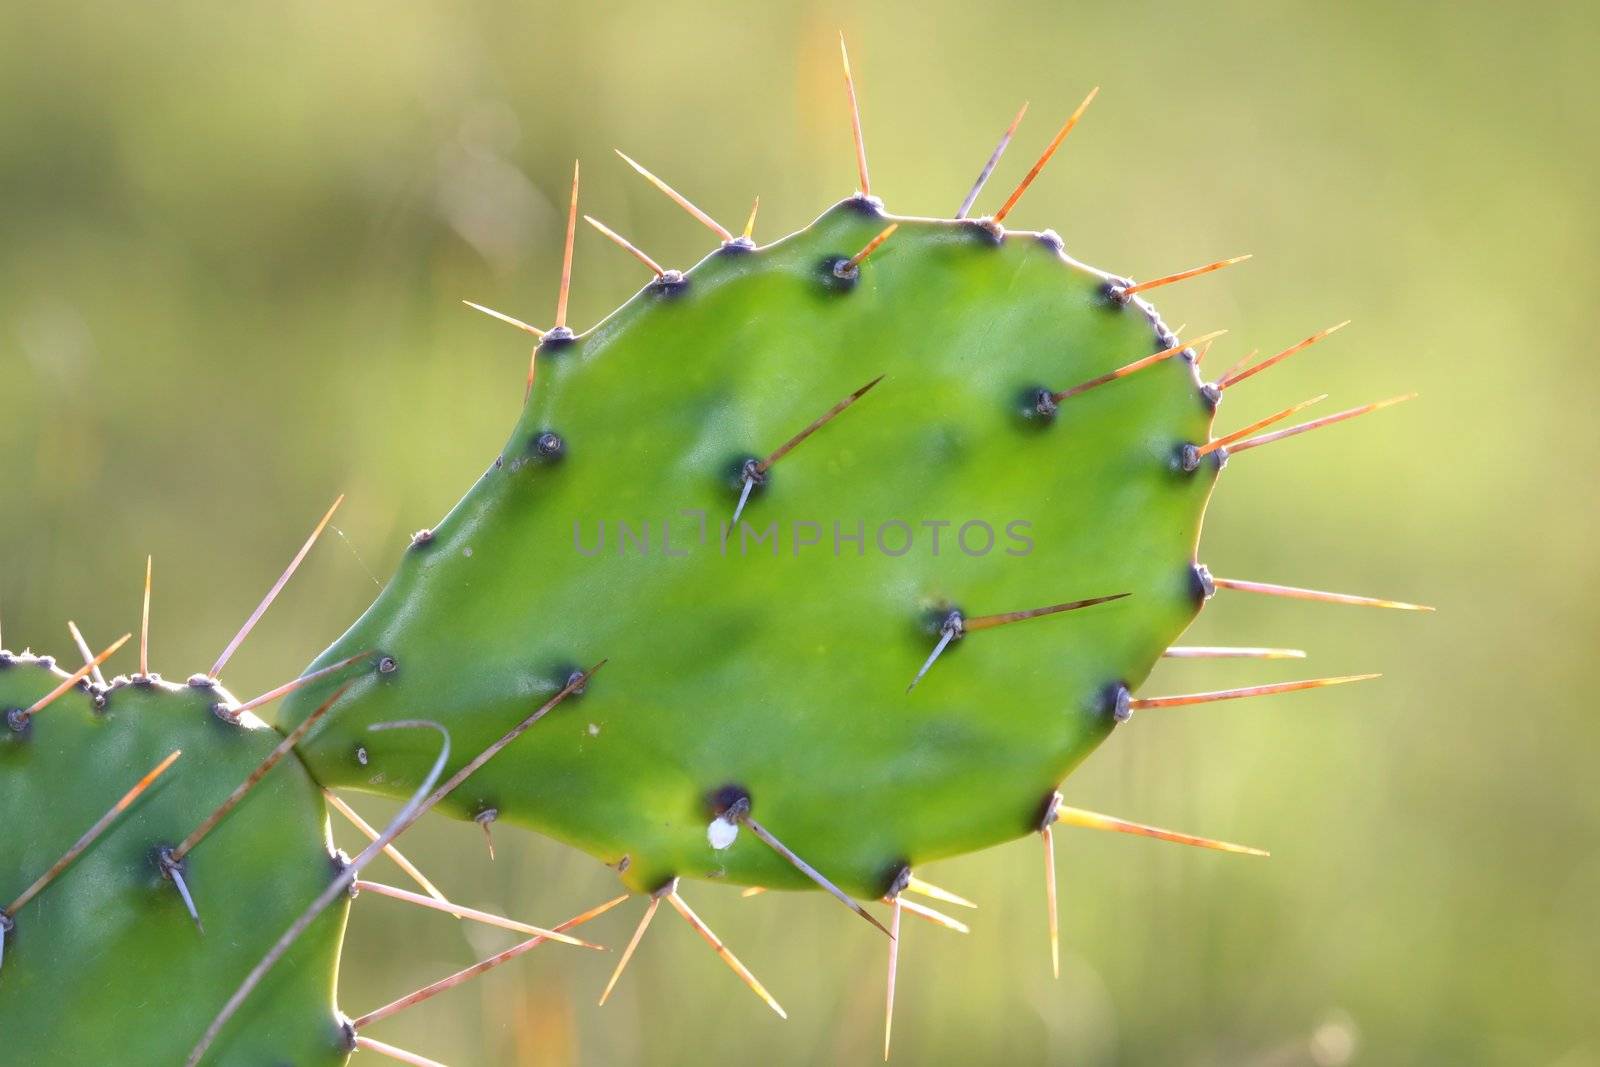 Thorny leaf of the prickly pear cactus plant